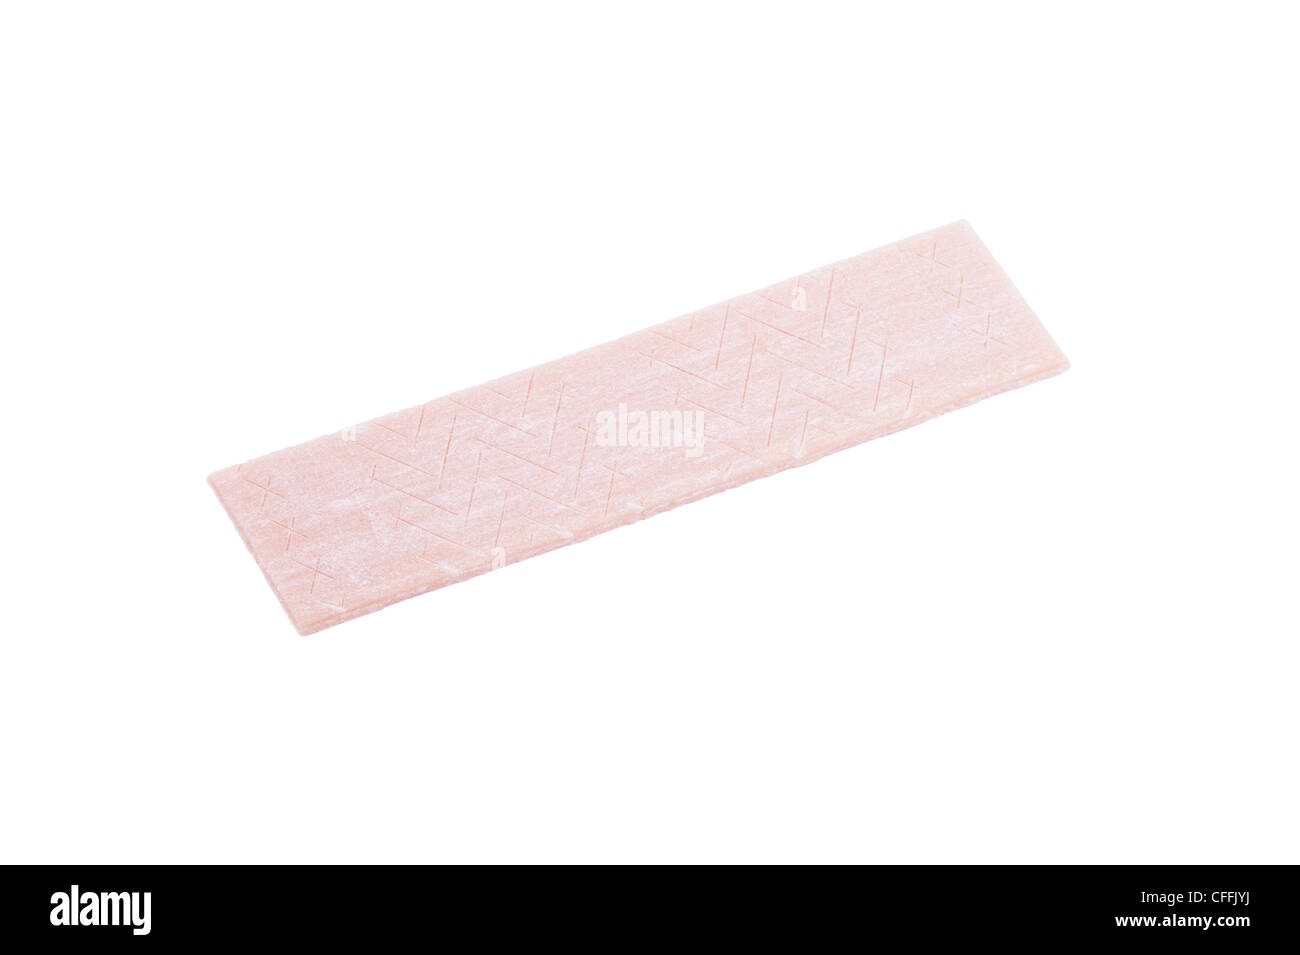 A stick of Wrigley's Chewing Gum on a white background Stock Photo